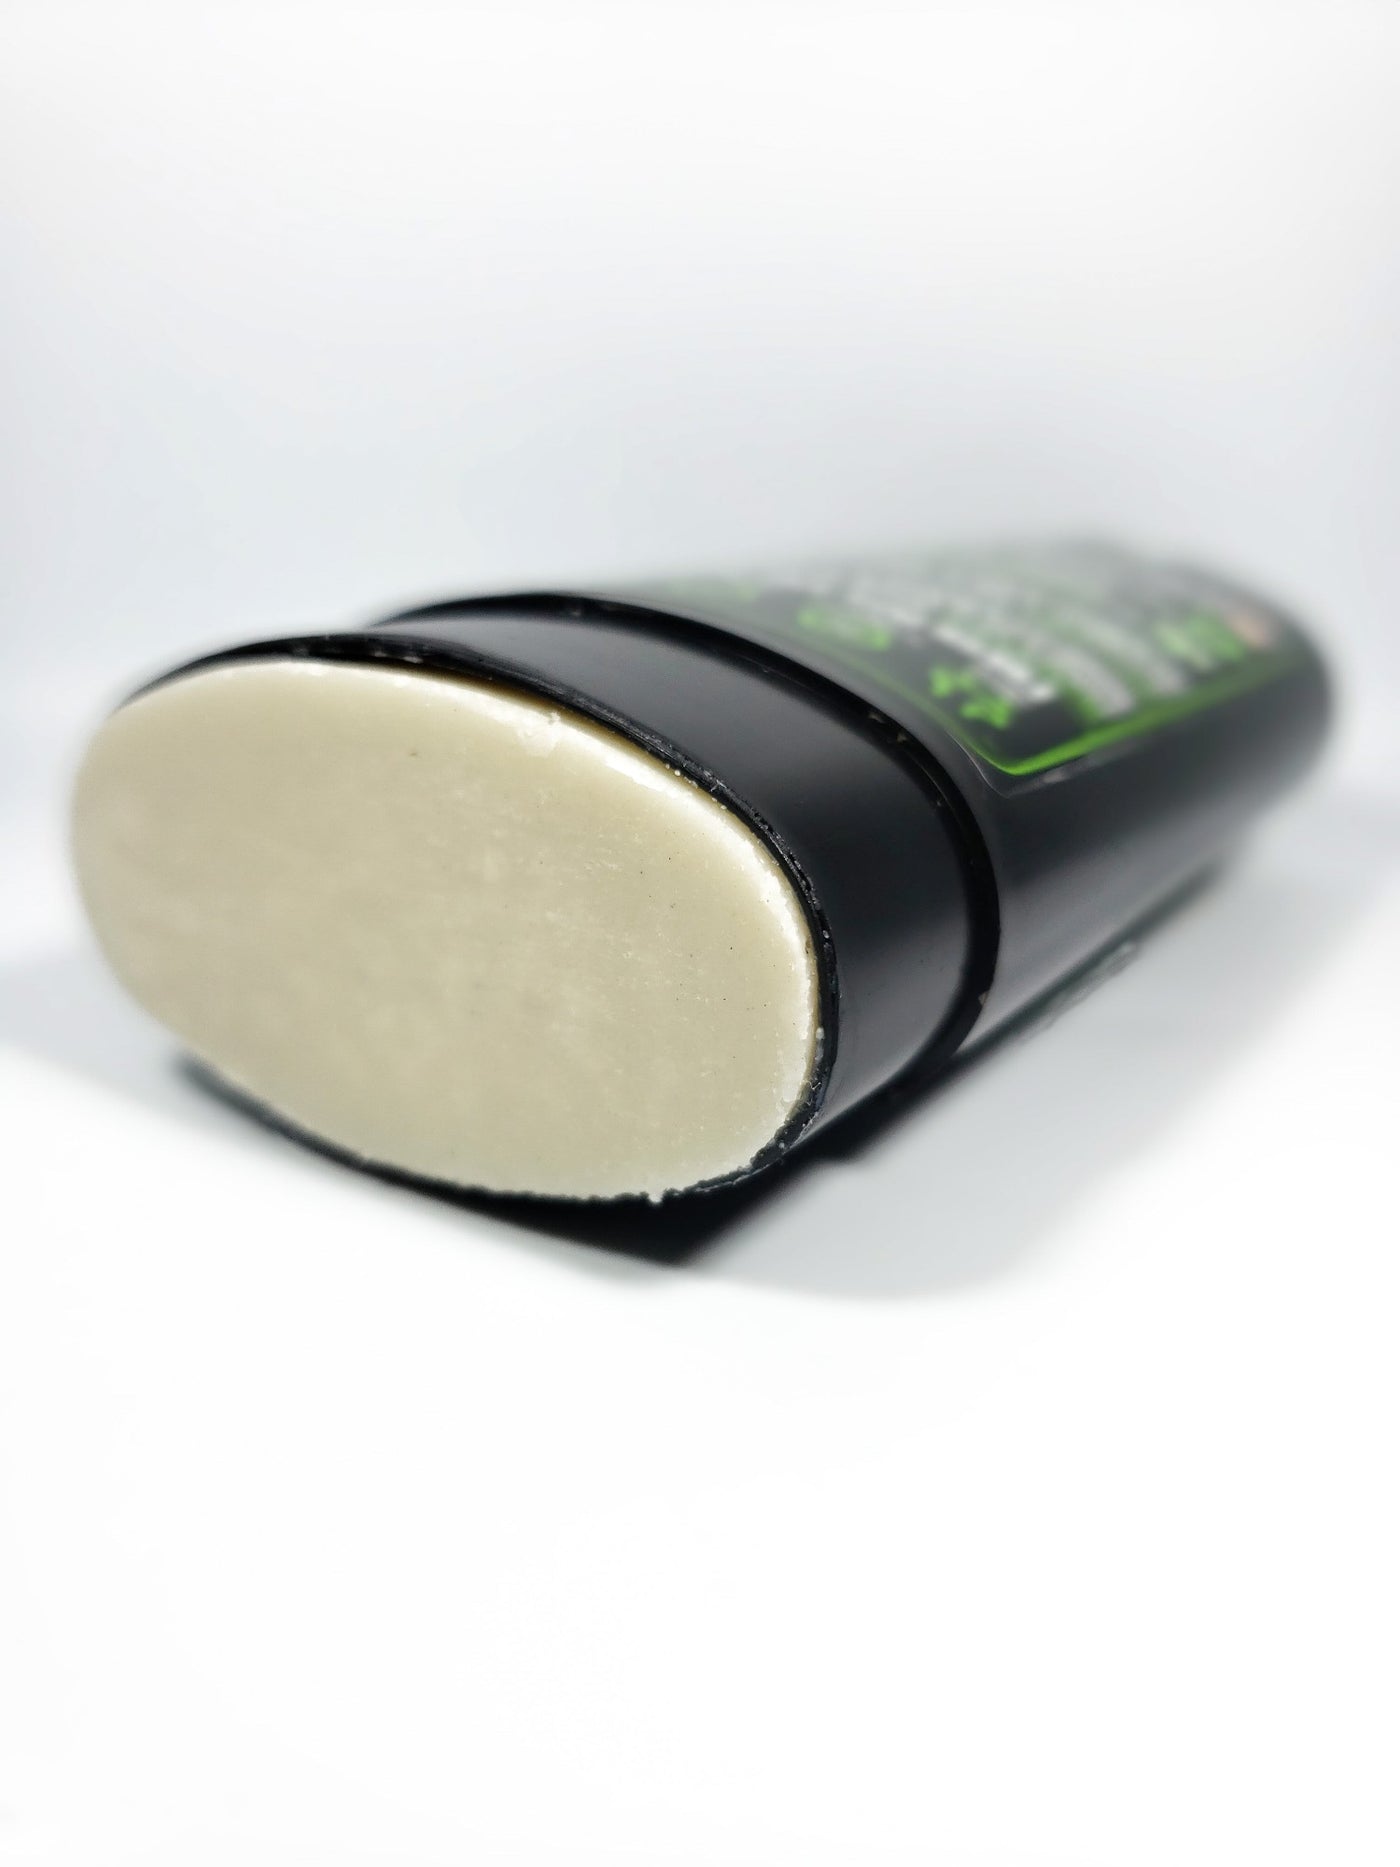 photo of deodorant laying on its back with the cap off depicting the texture of green theory kama natural probiotic deodorant.